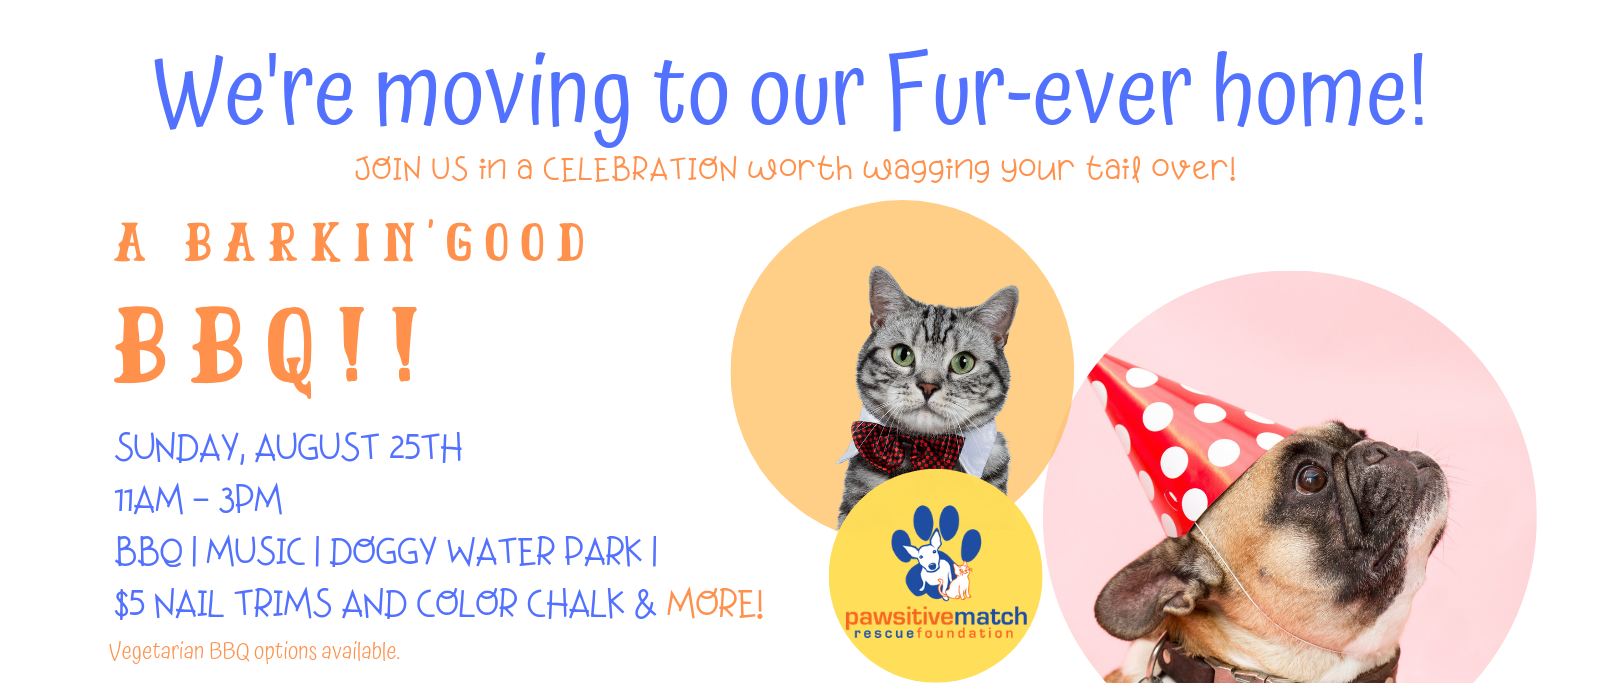 Pawsitive Match Rescue Foundation – Calgary Based Dog and Cat Rescue